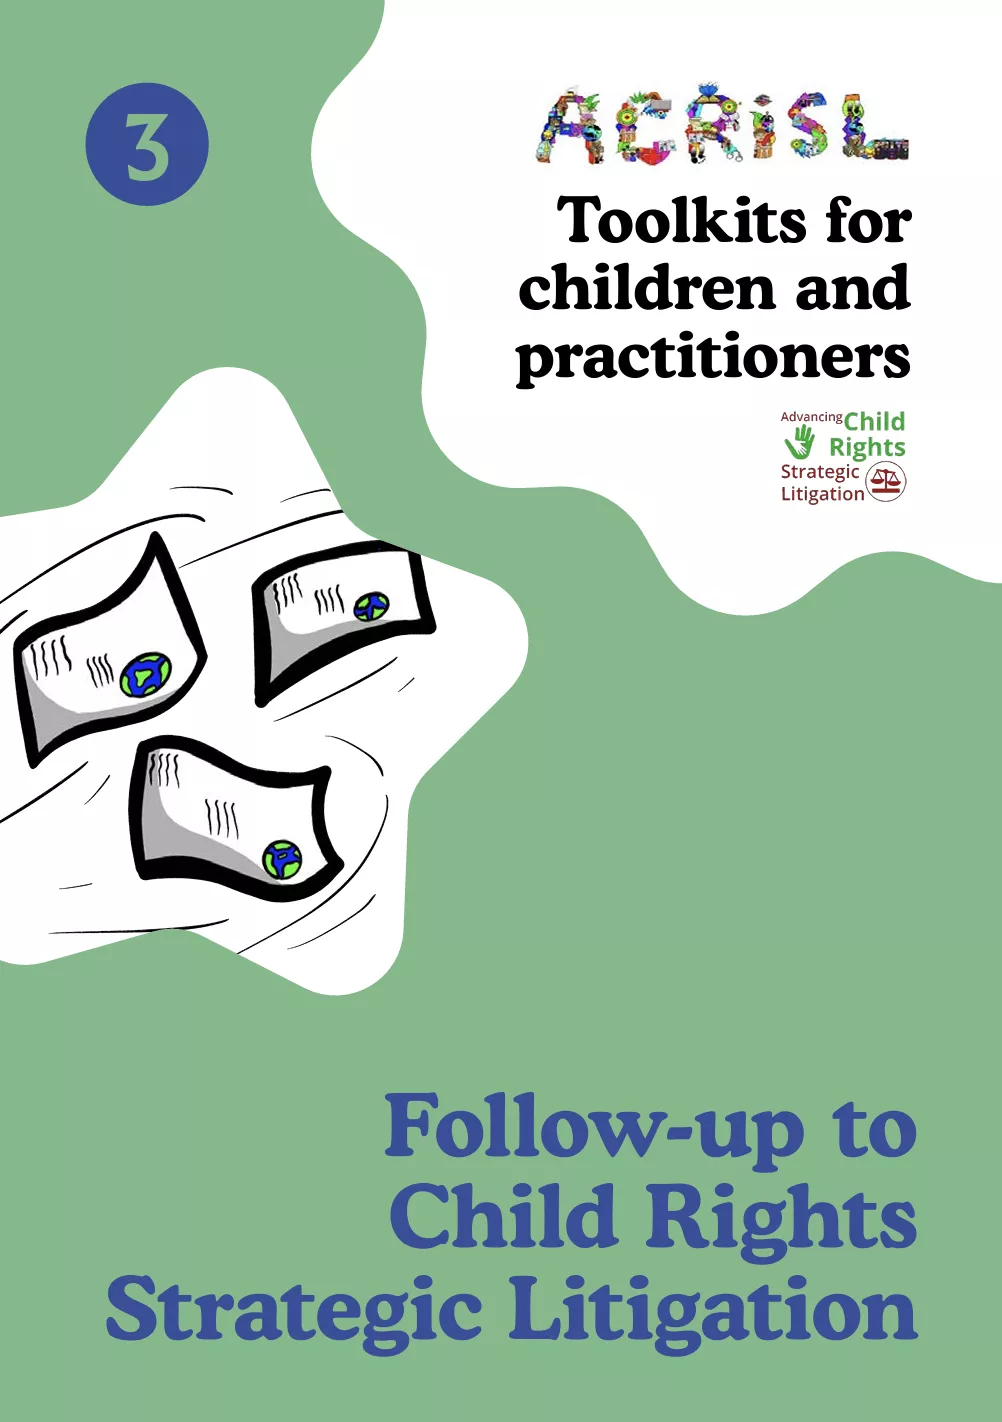 Toolkit 3: Follow-up to Child Rights Strategic Litigation